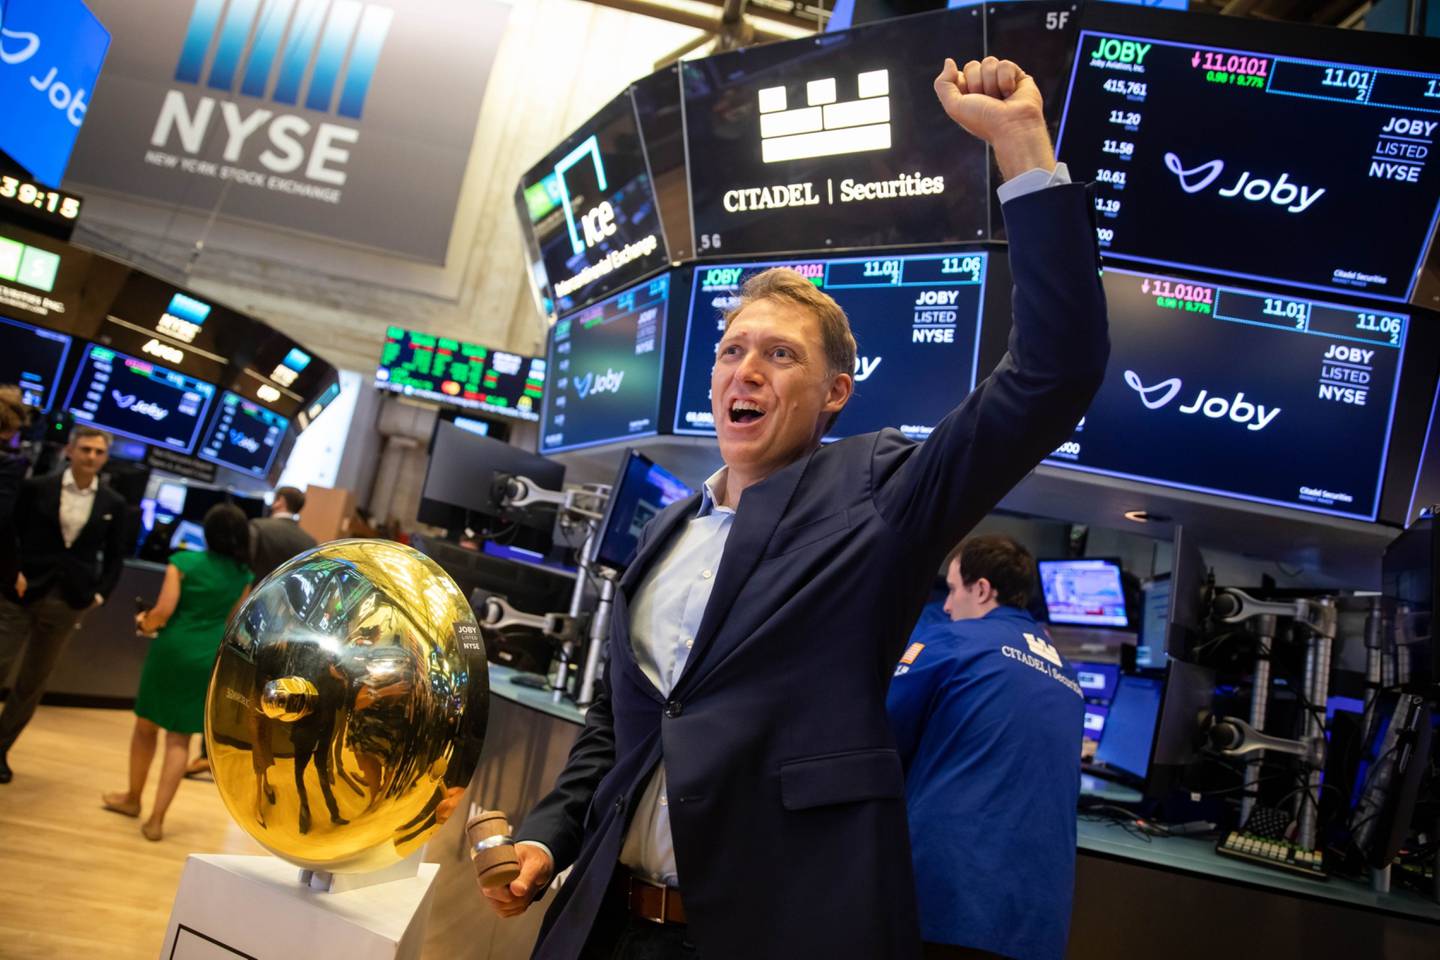 JoeBen Bevirt, founder and CEO of Joby Aviation, celebrates during the company's IPO at the New York Stock Exchange, Aug. 11, 2021. Photographer: Michael Nagle/Bloombergdfd